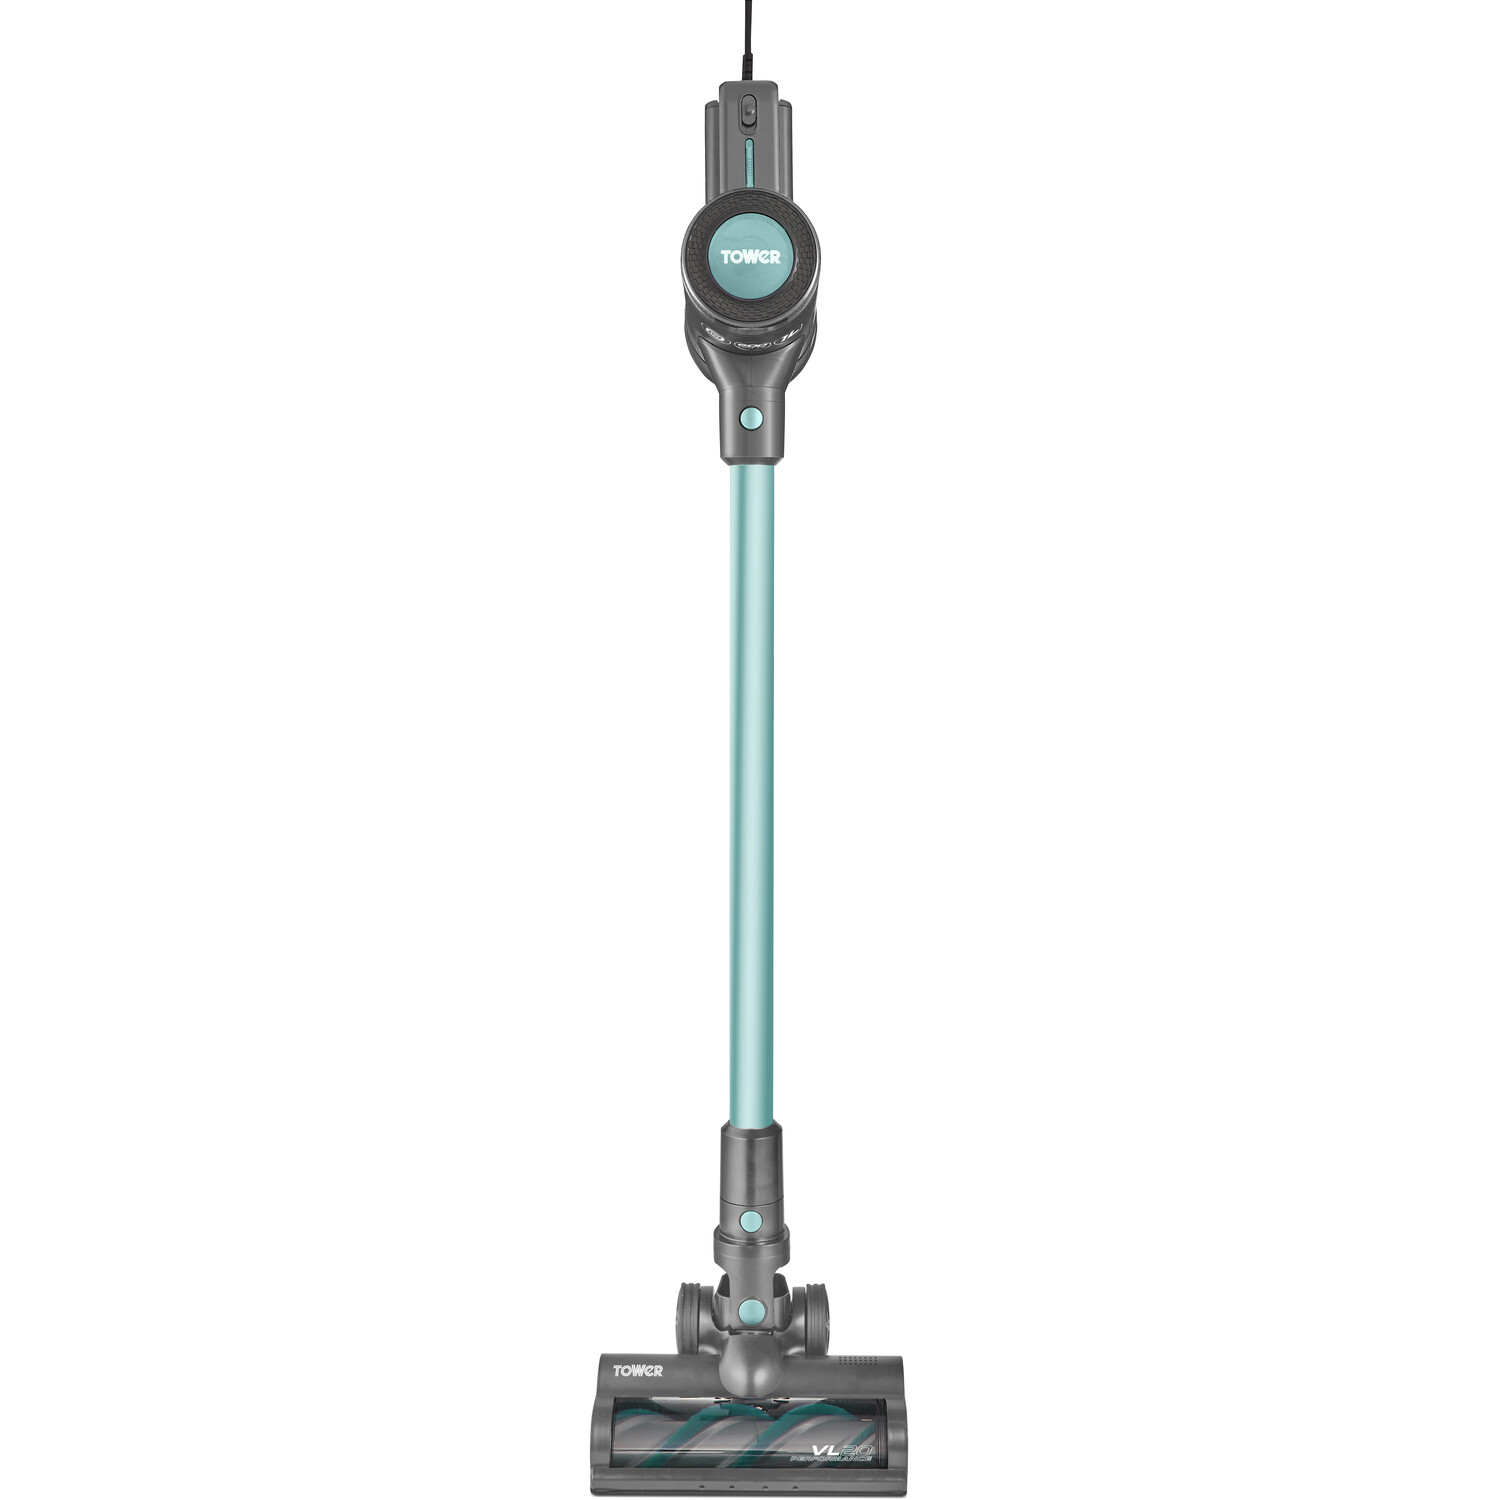 Tower VL20 Performance Corded Vacuum Cleaner with HEPA Filter 400W Image 1